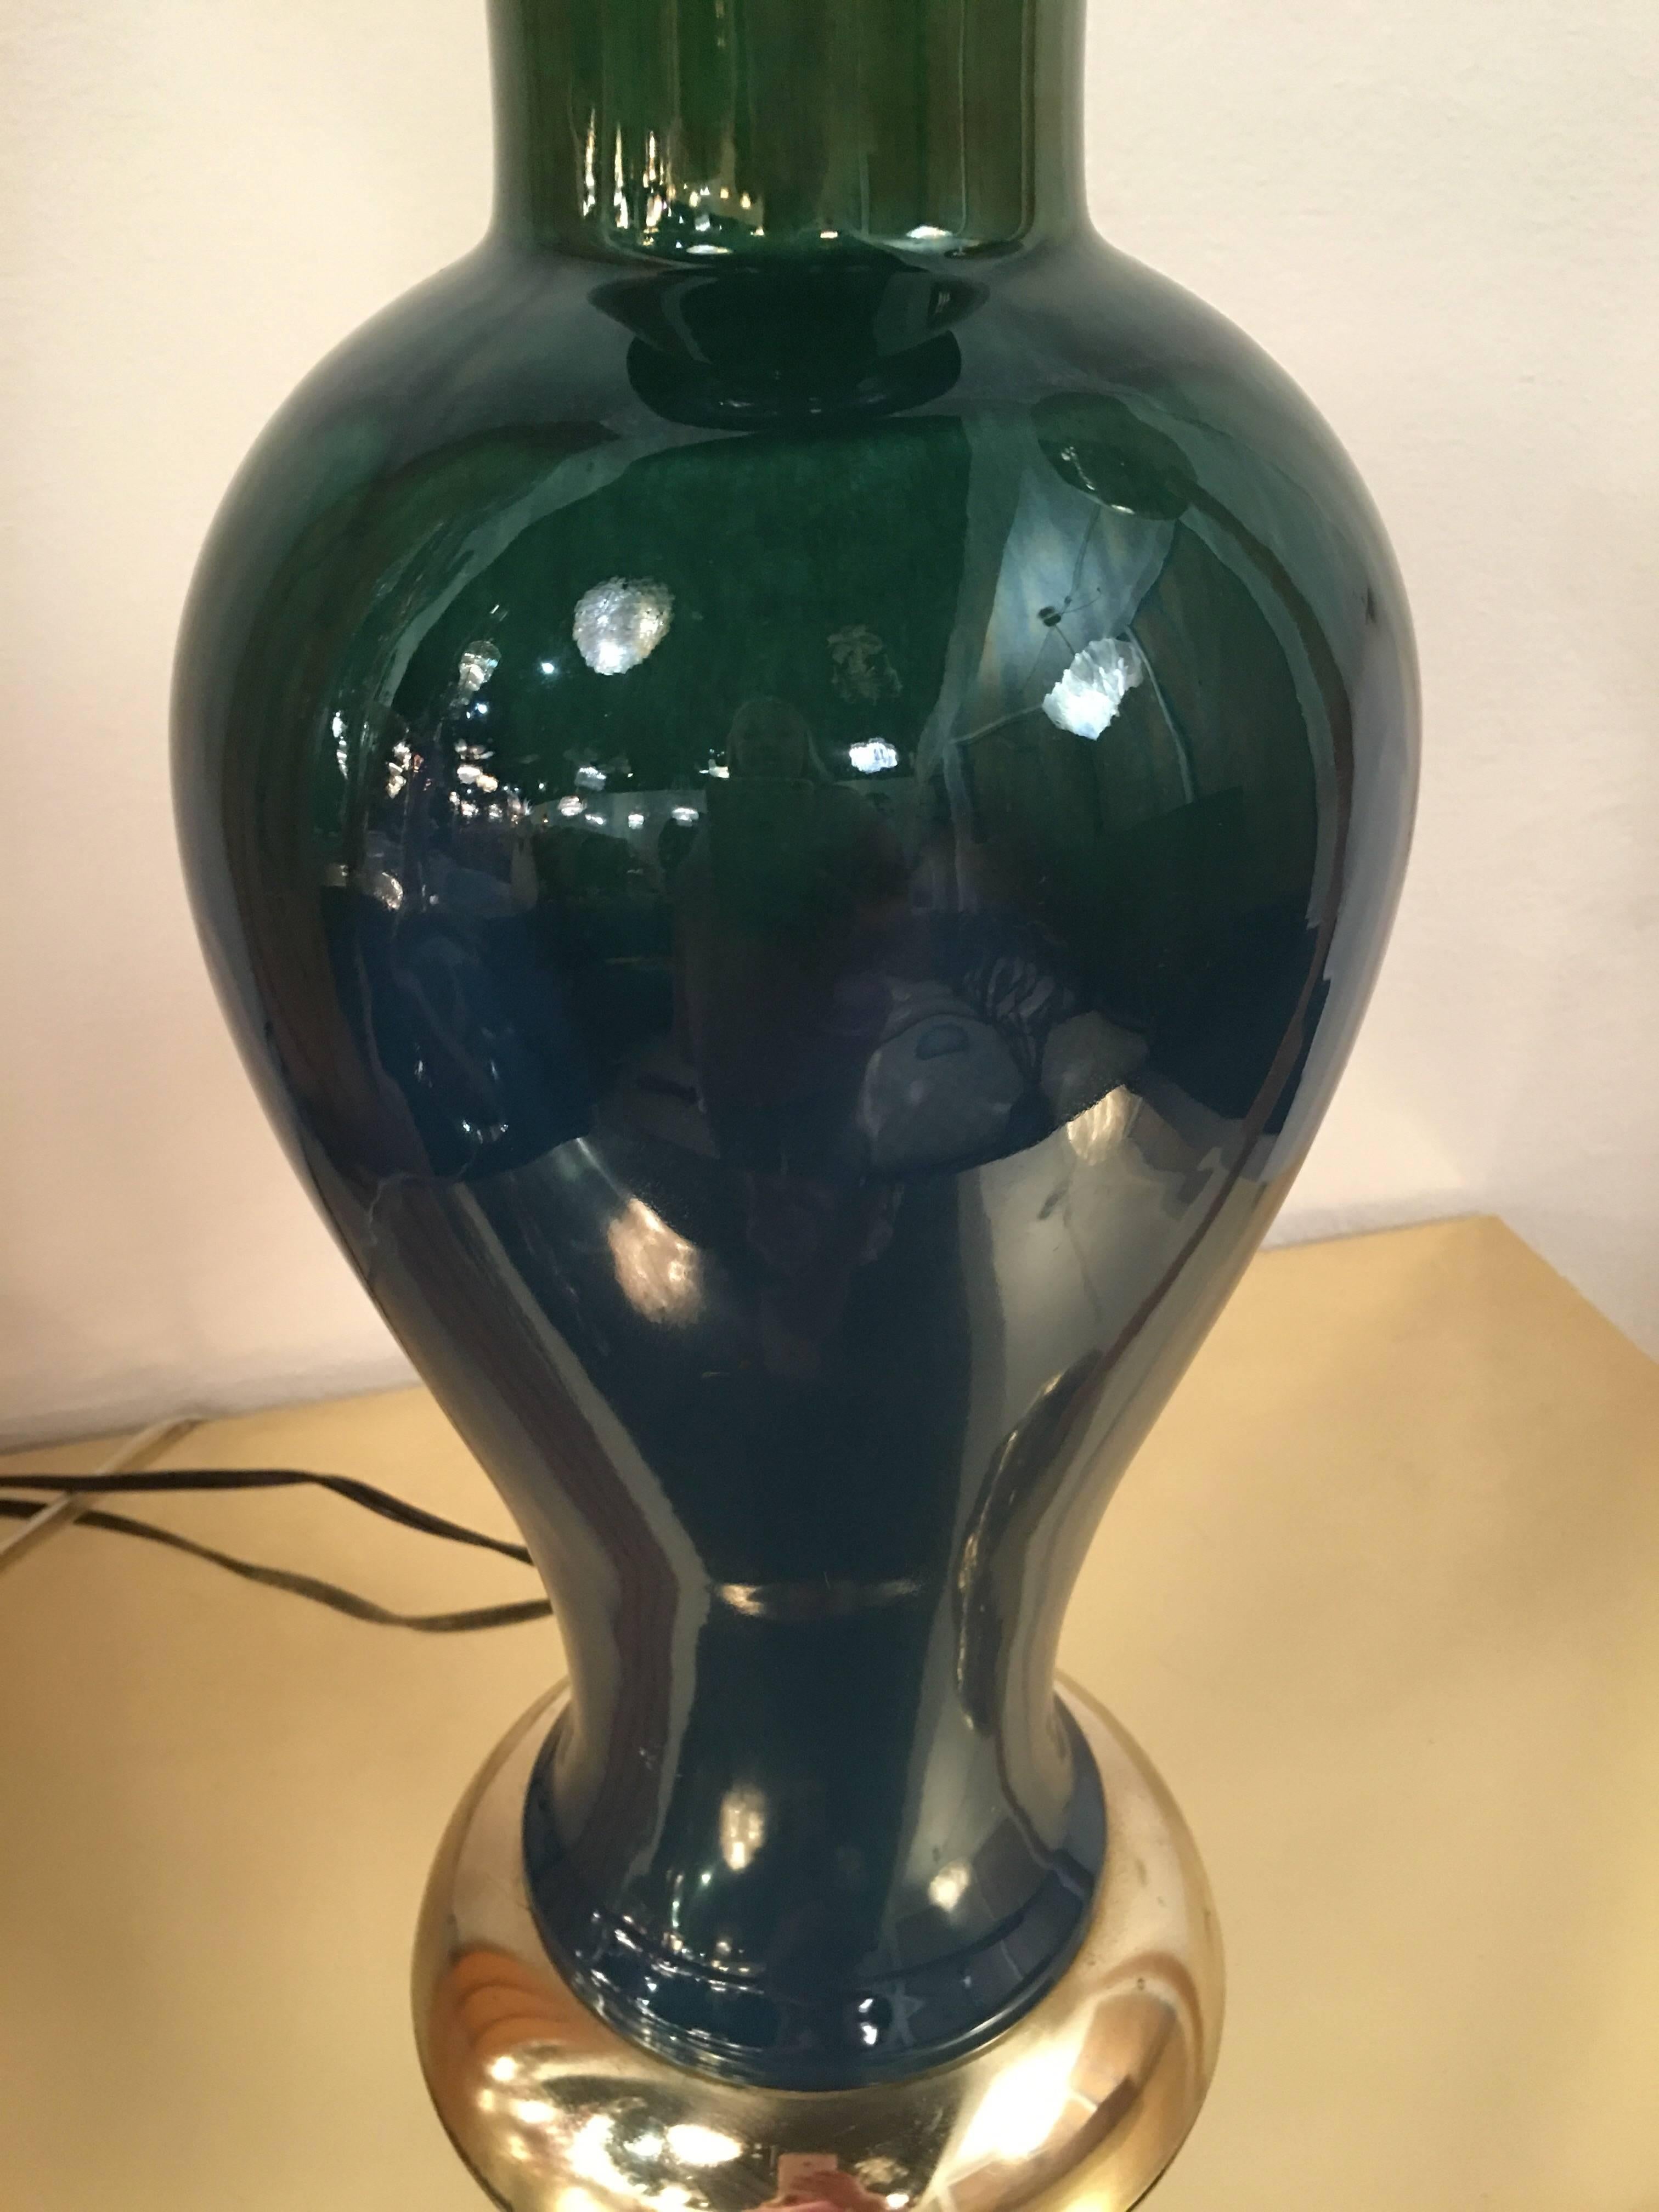 Vintage blue and green drip glaze table lamp with polished brass base, Mid-Century Modern. Tested, working order.